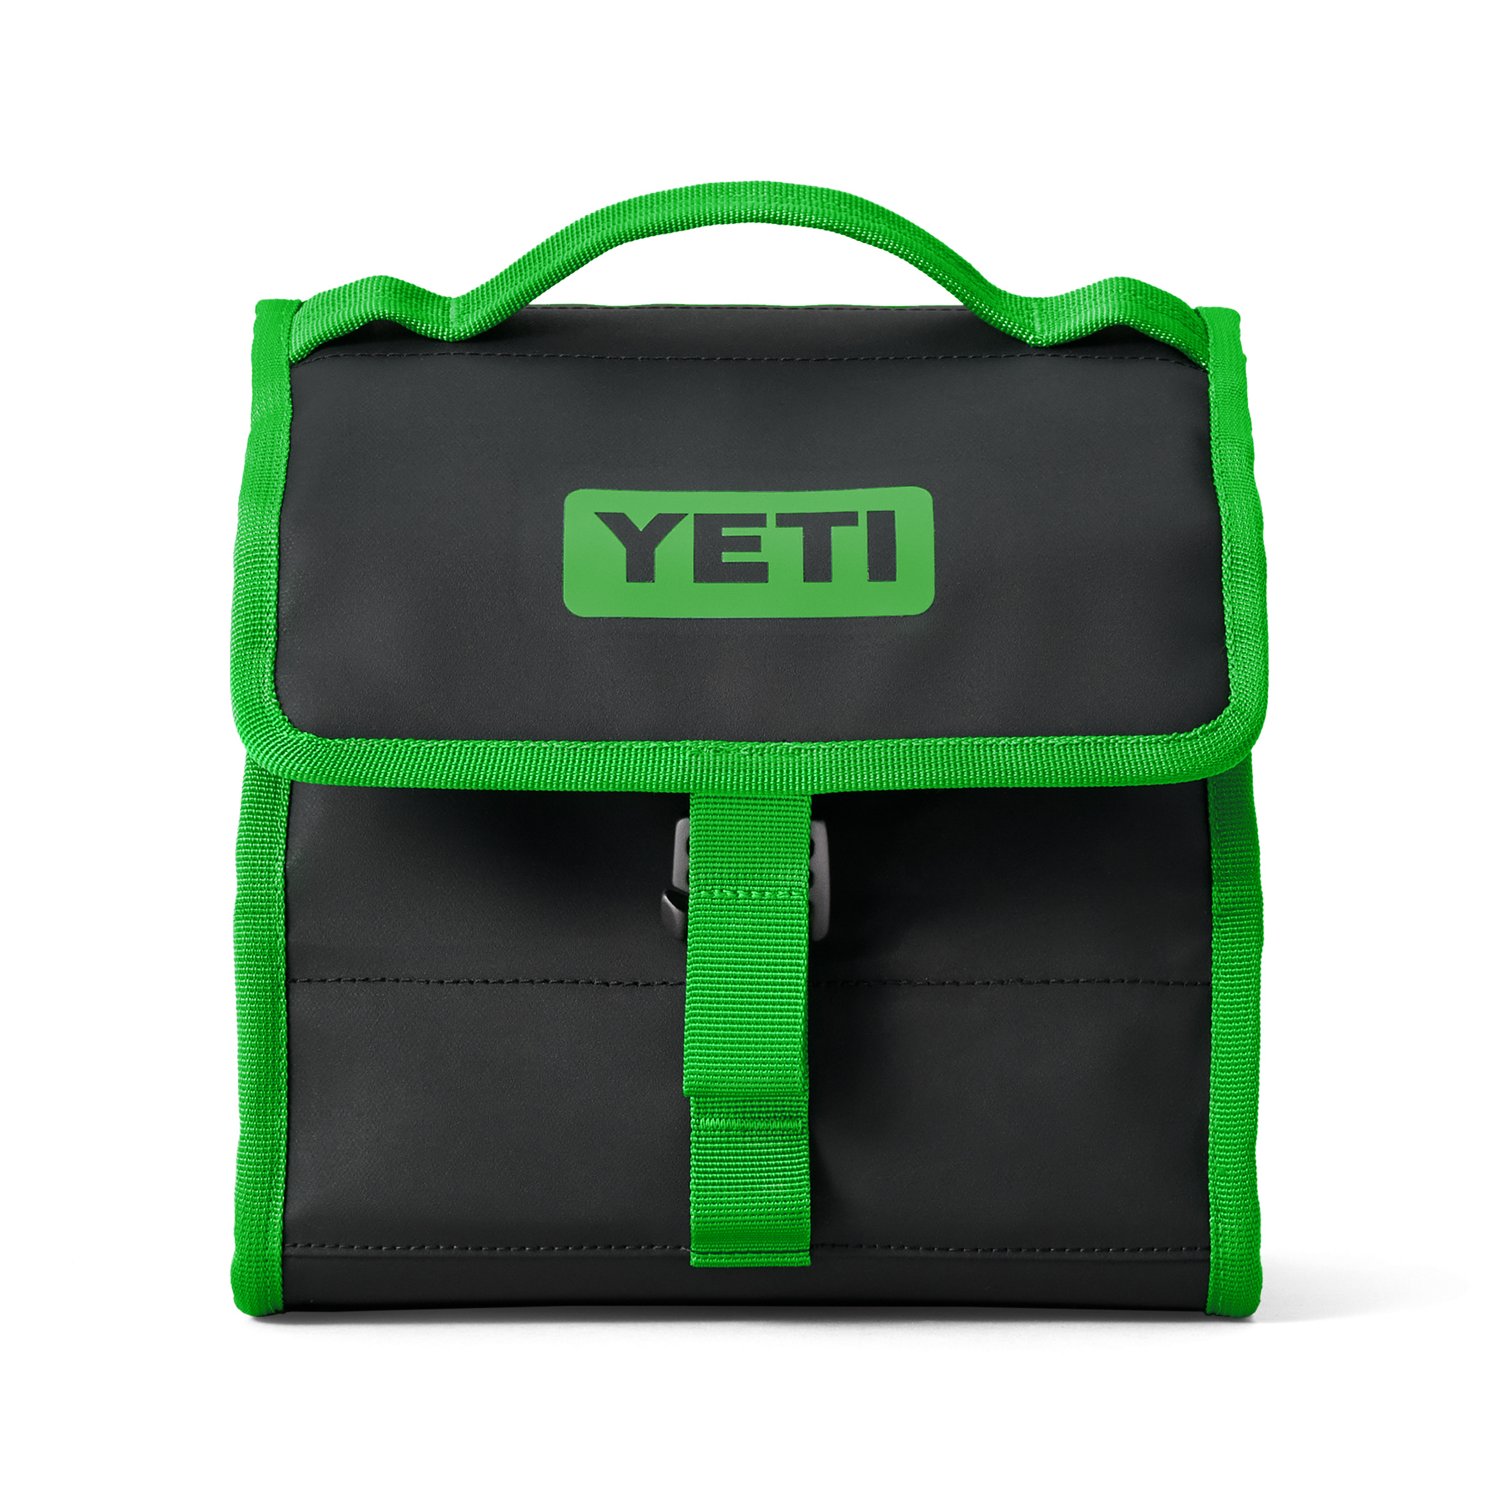 https://academy.scene7.com/is/image/academy//coolers/yeti-daytrip-lunch-bag-18060131150-green/a70982d8d8dd45adaf32c95a0a8c765e